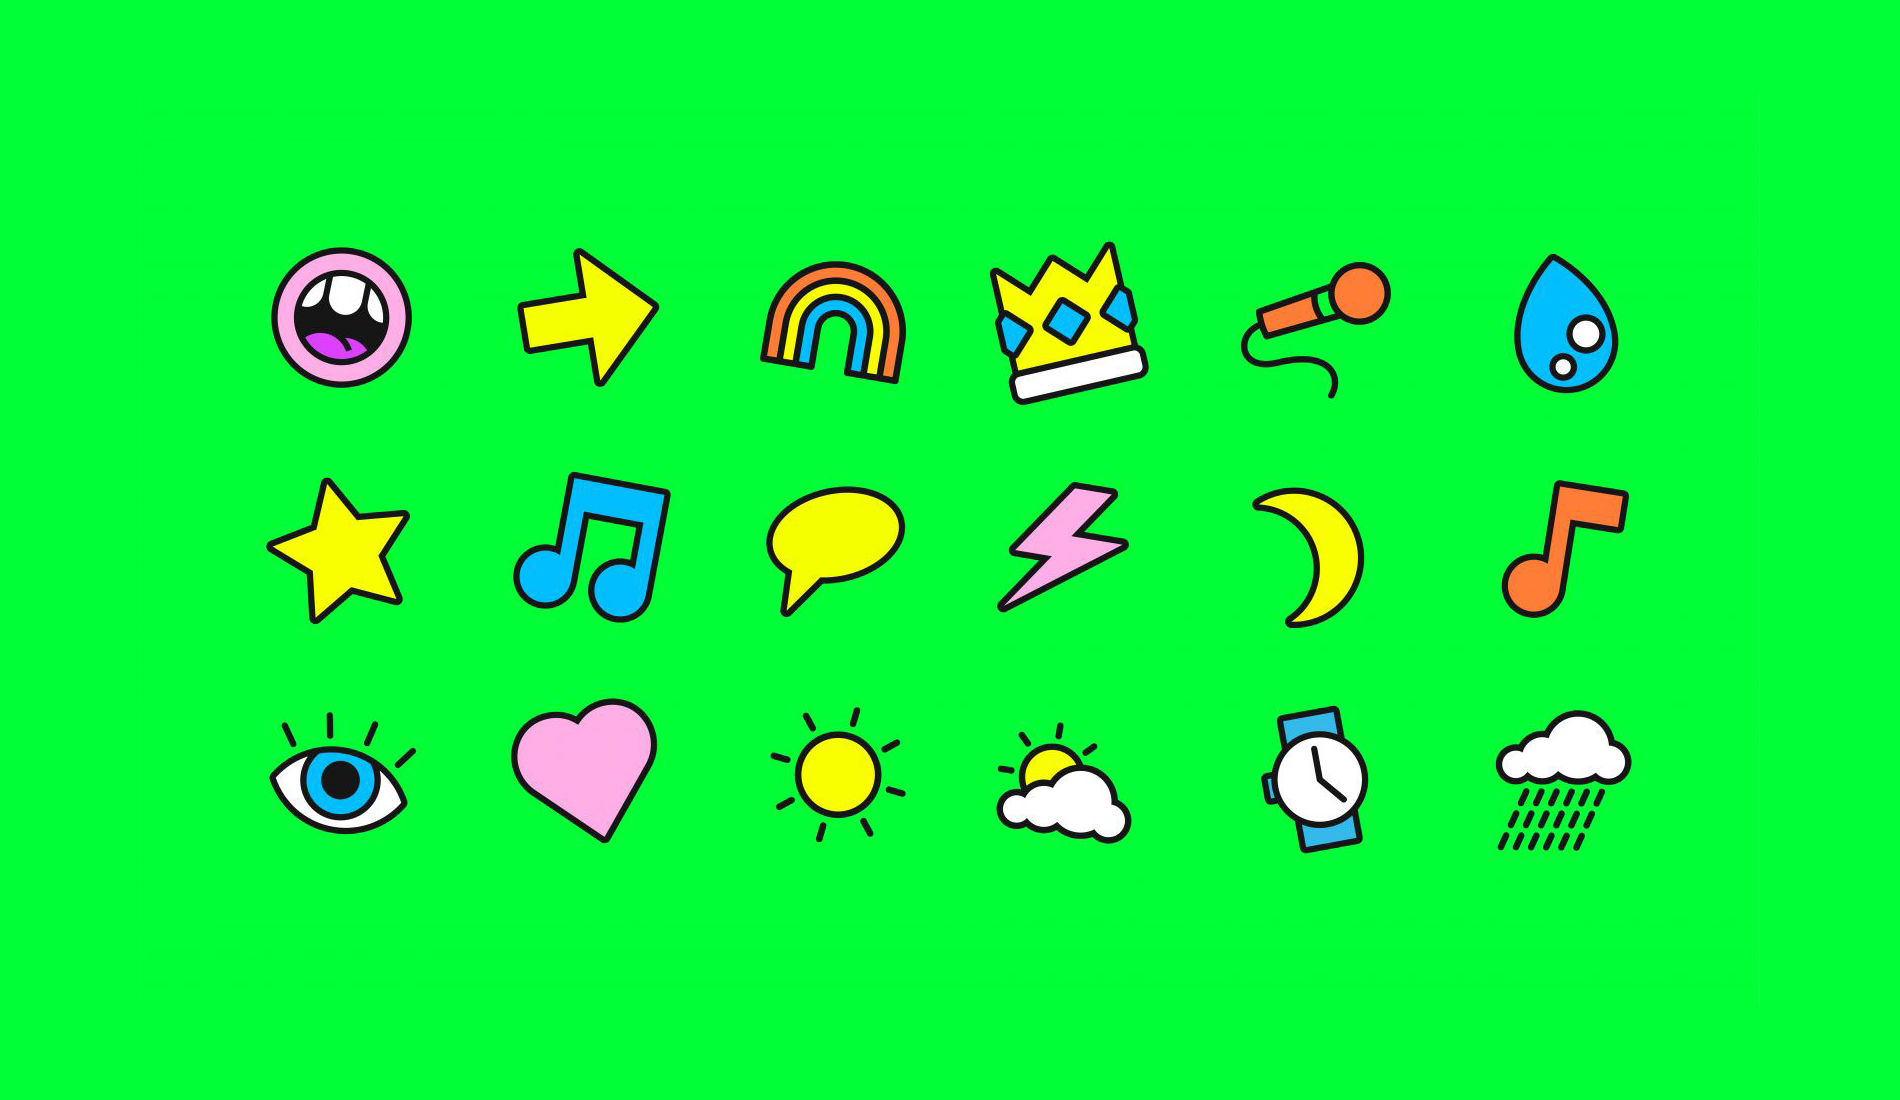 Visual identity and iconography for karaoke brand Sing King designed by London-based Nomad